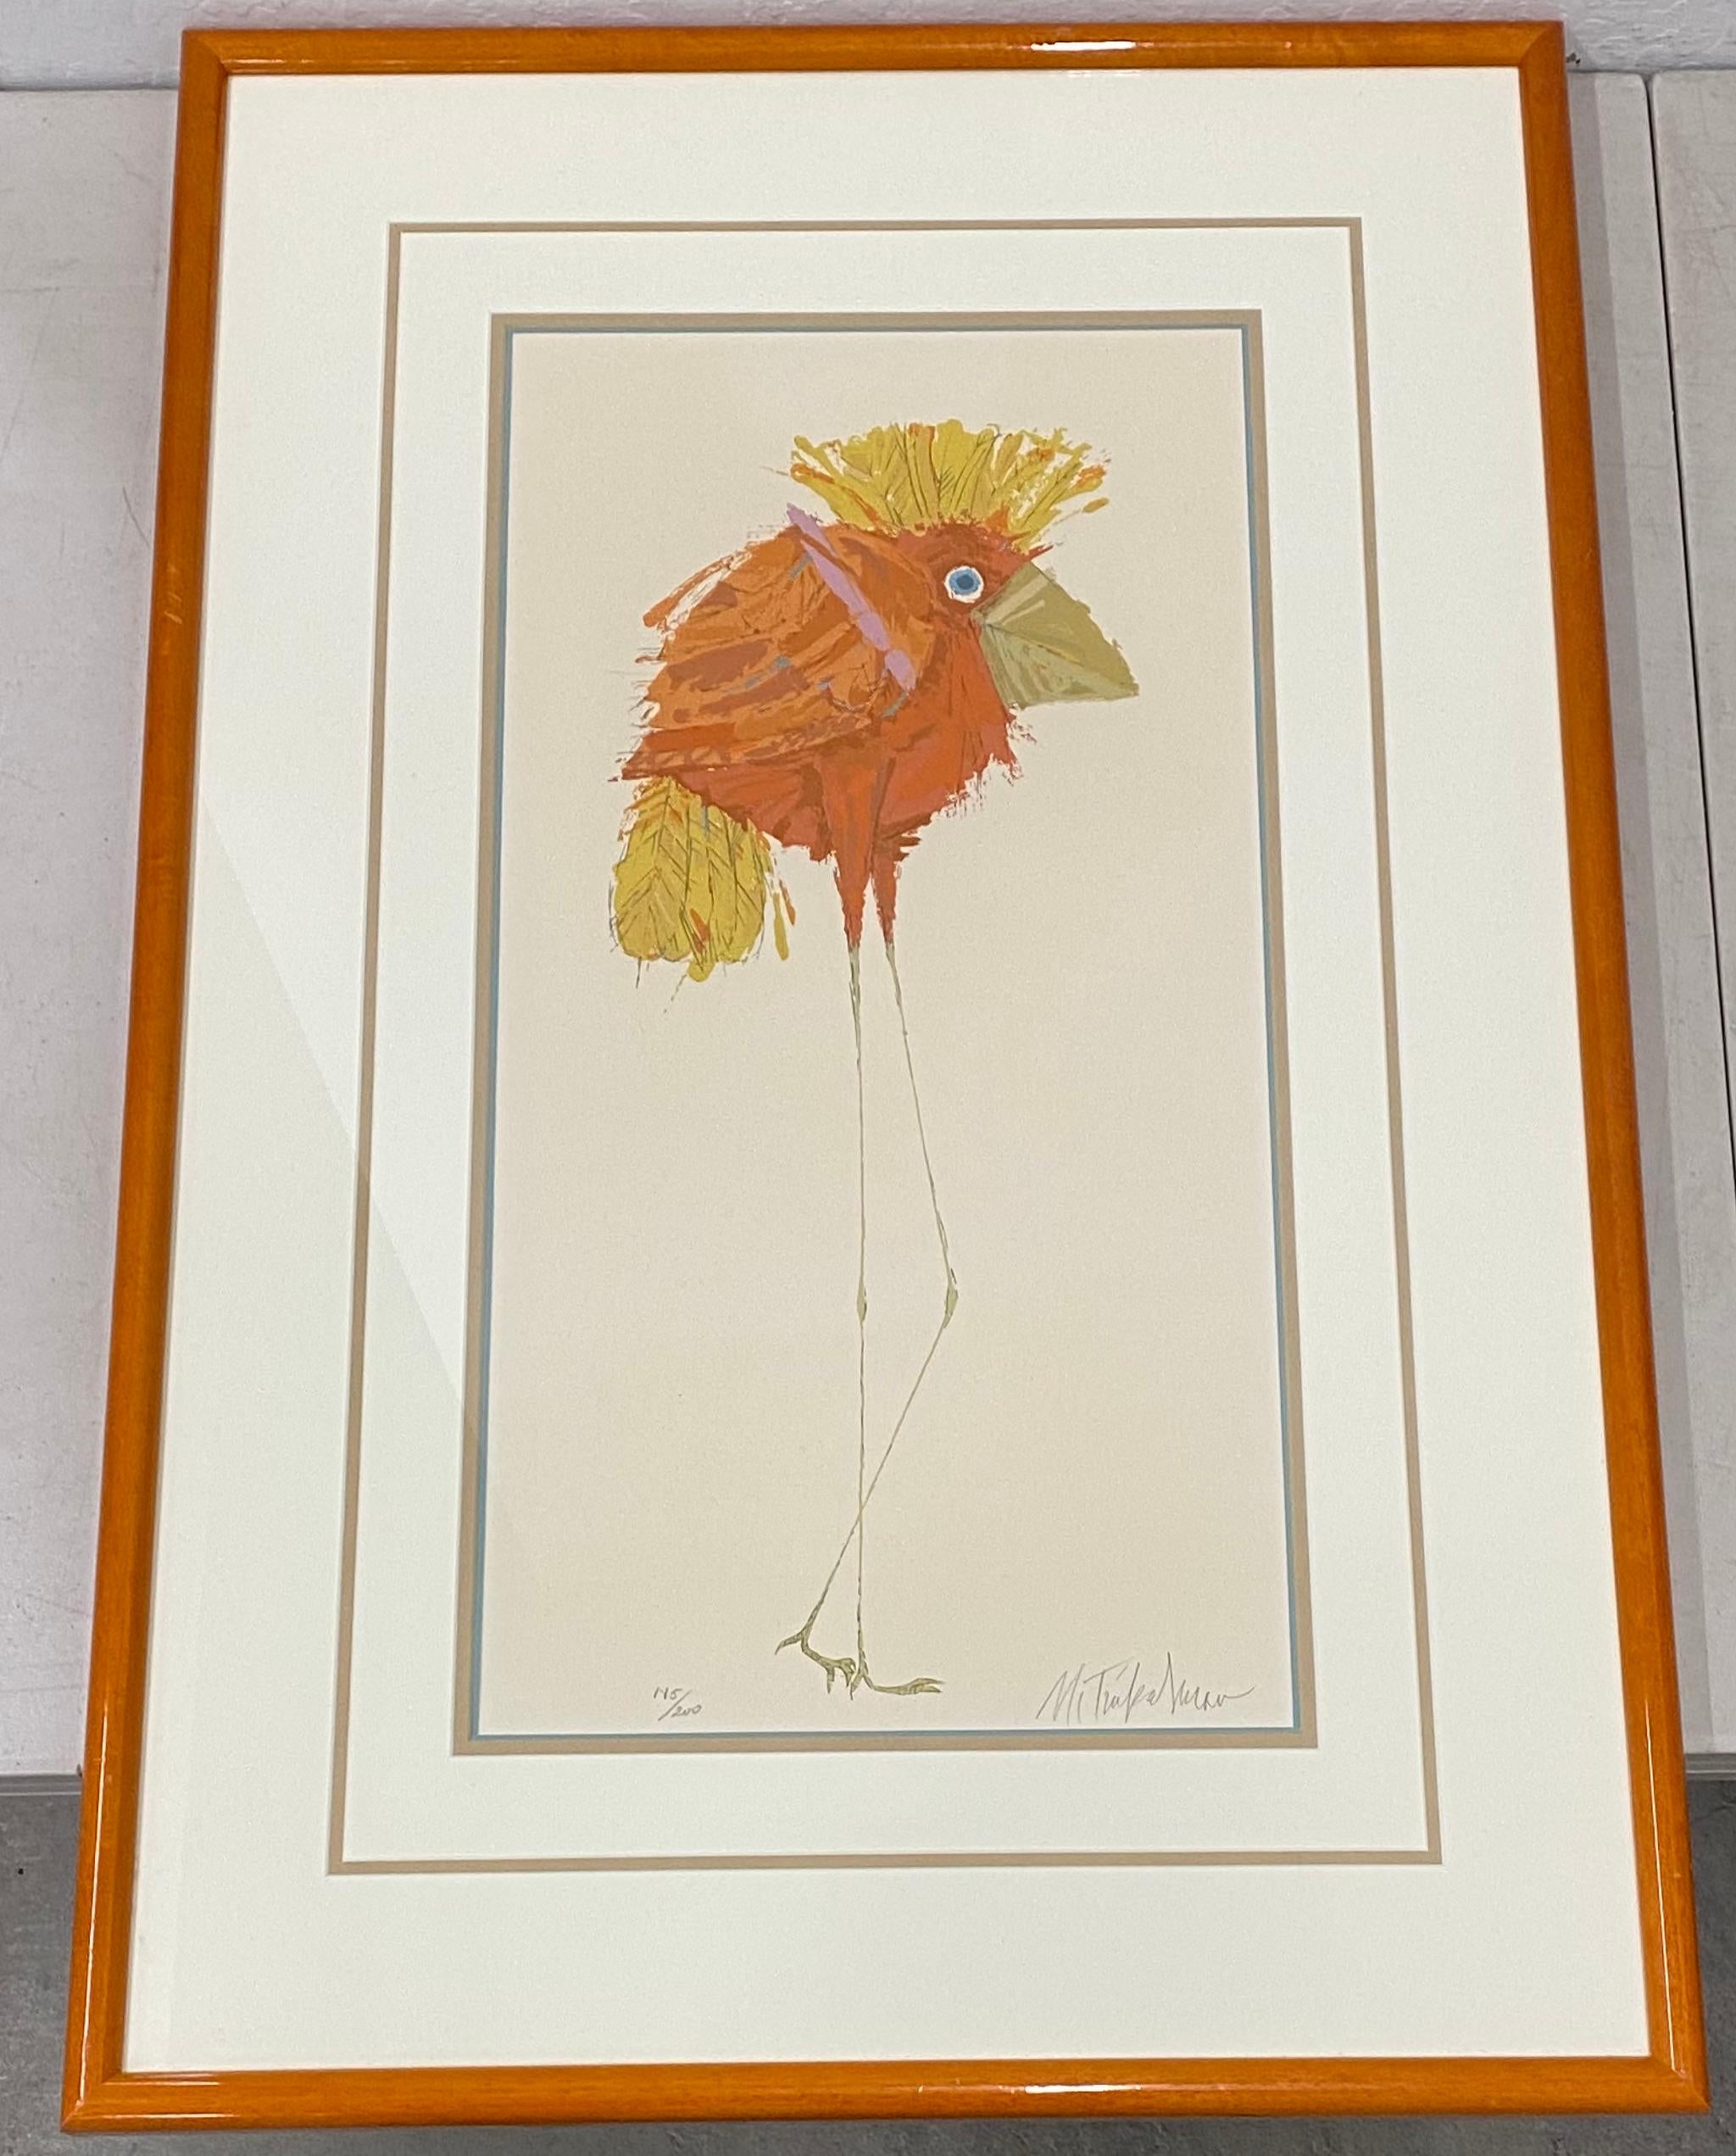 Unknown Animal Print - Whimsical "Long Legs" Bird With Orange Feathers Signed Lithograph 20th C